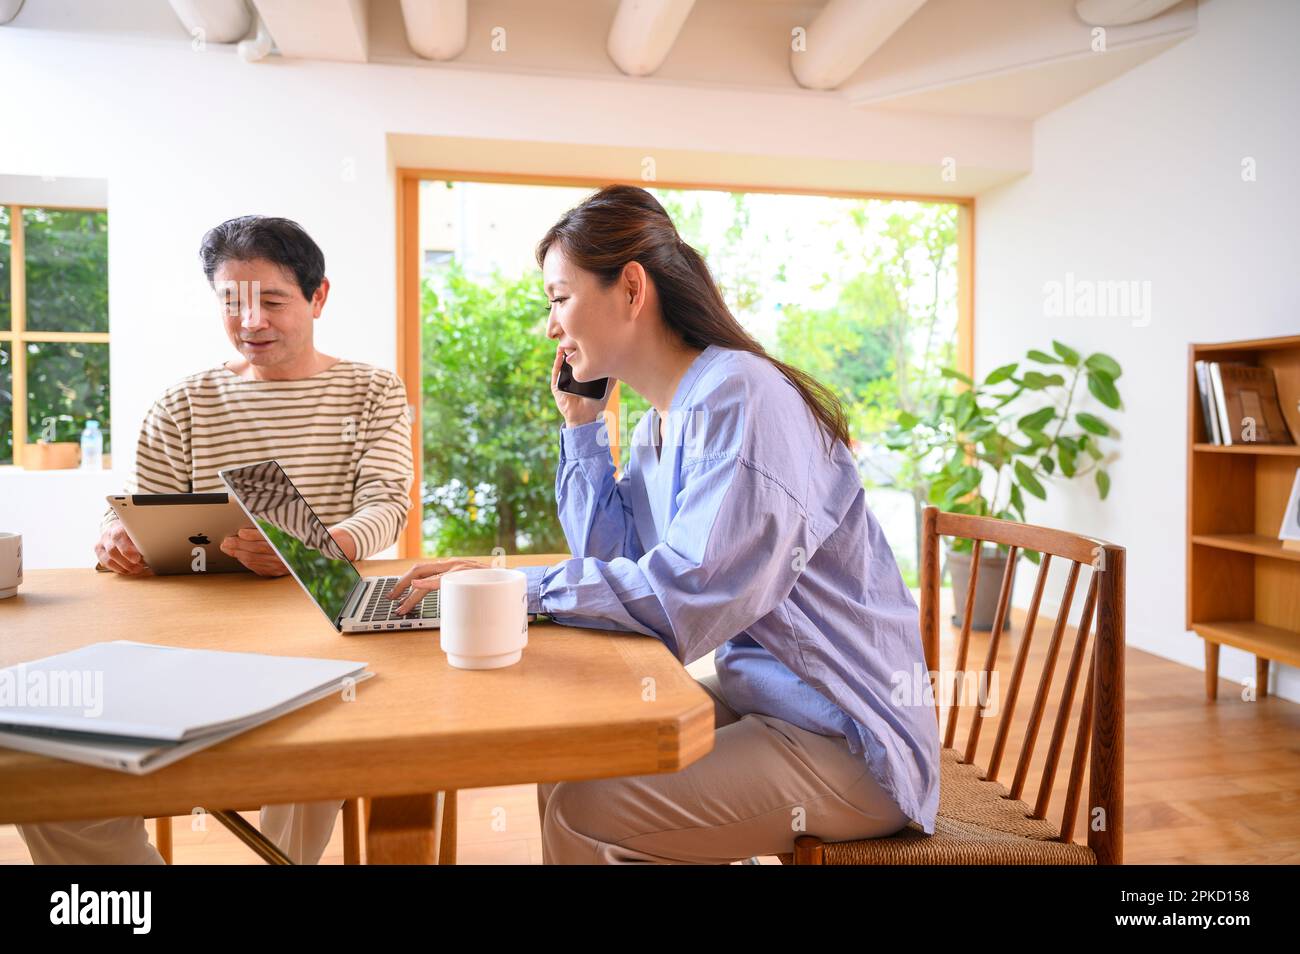 Teleworking middle-aged and older couples Stock Photo